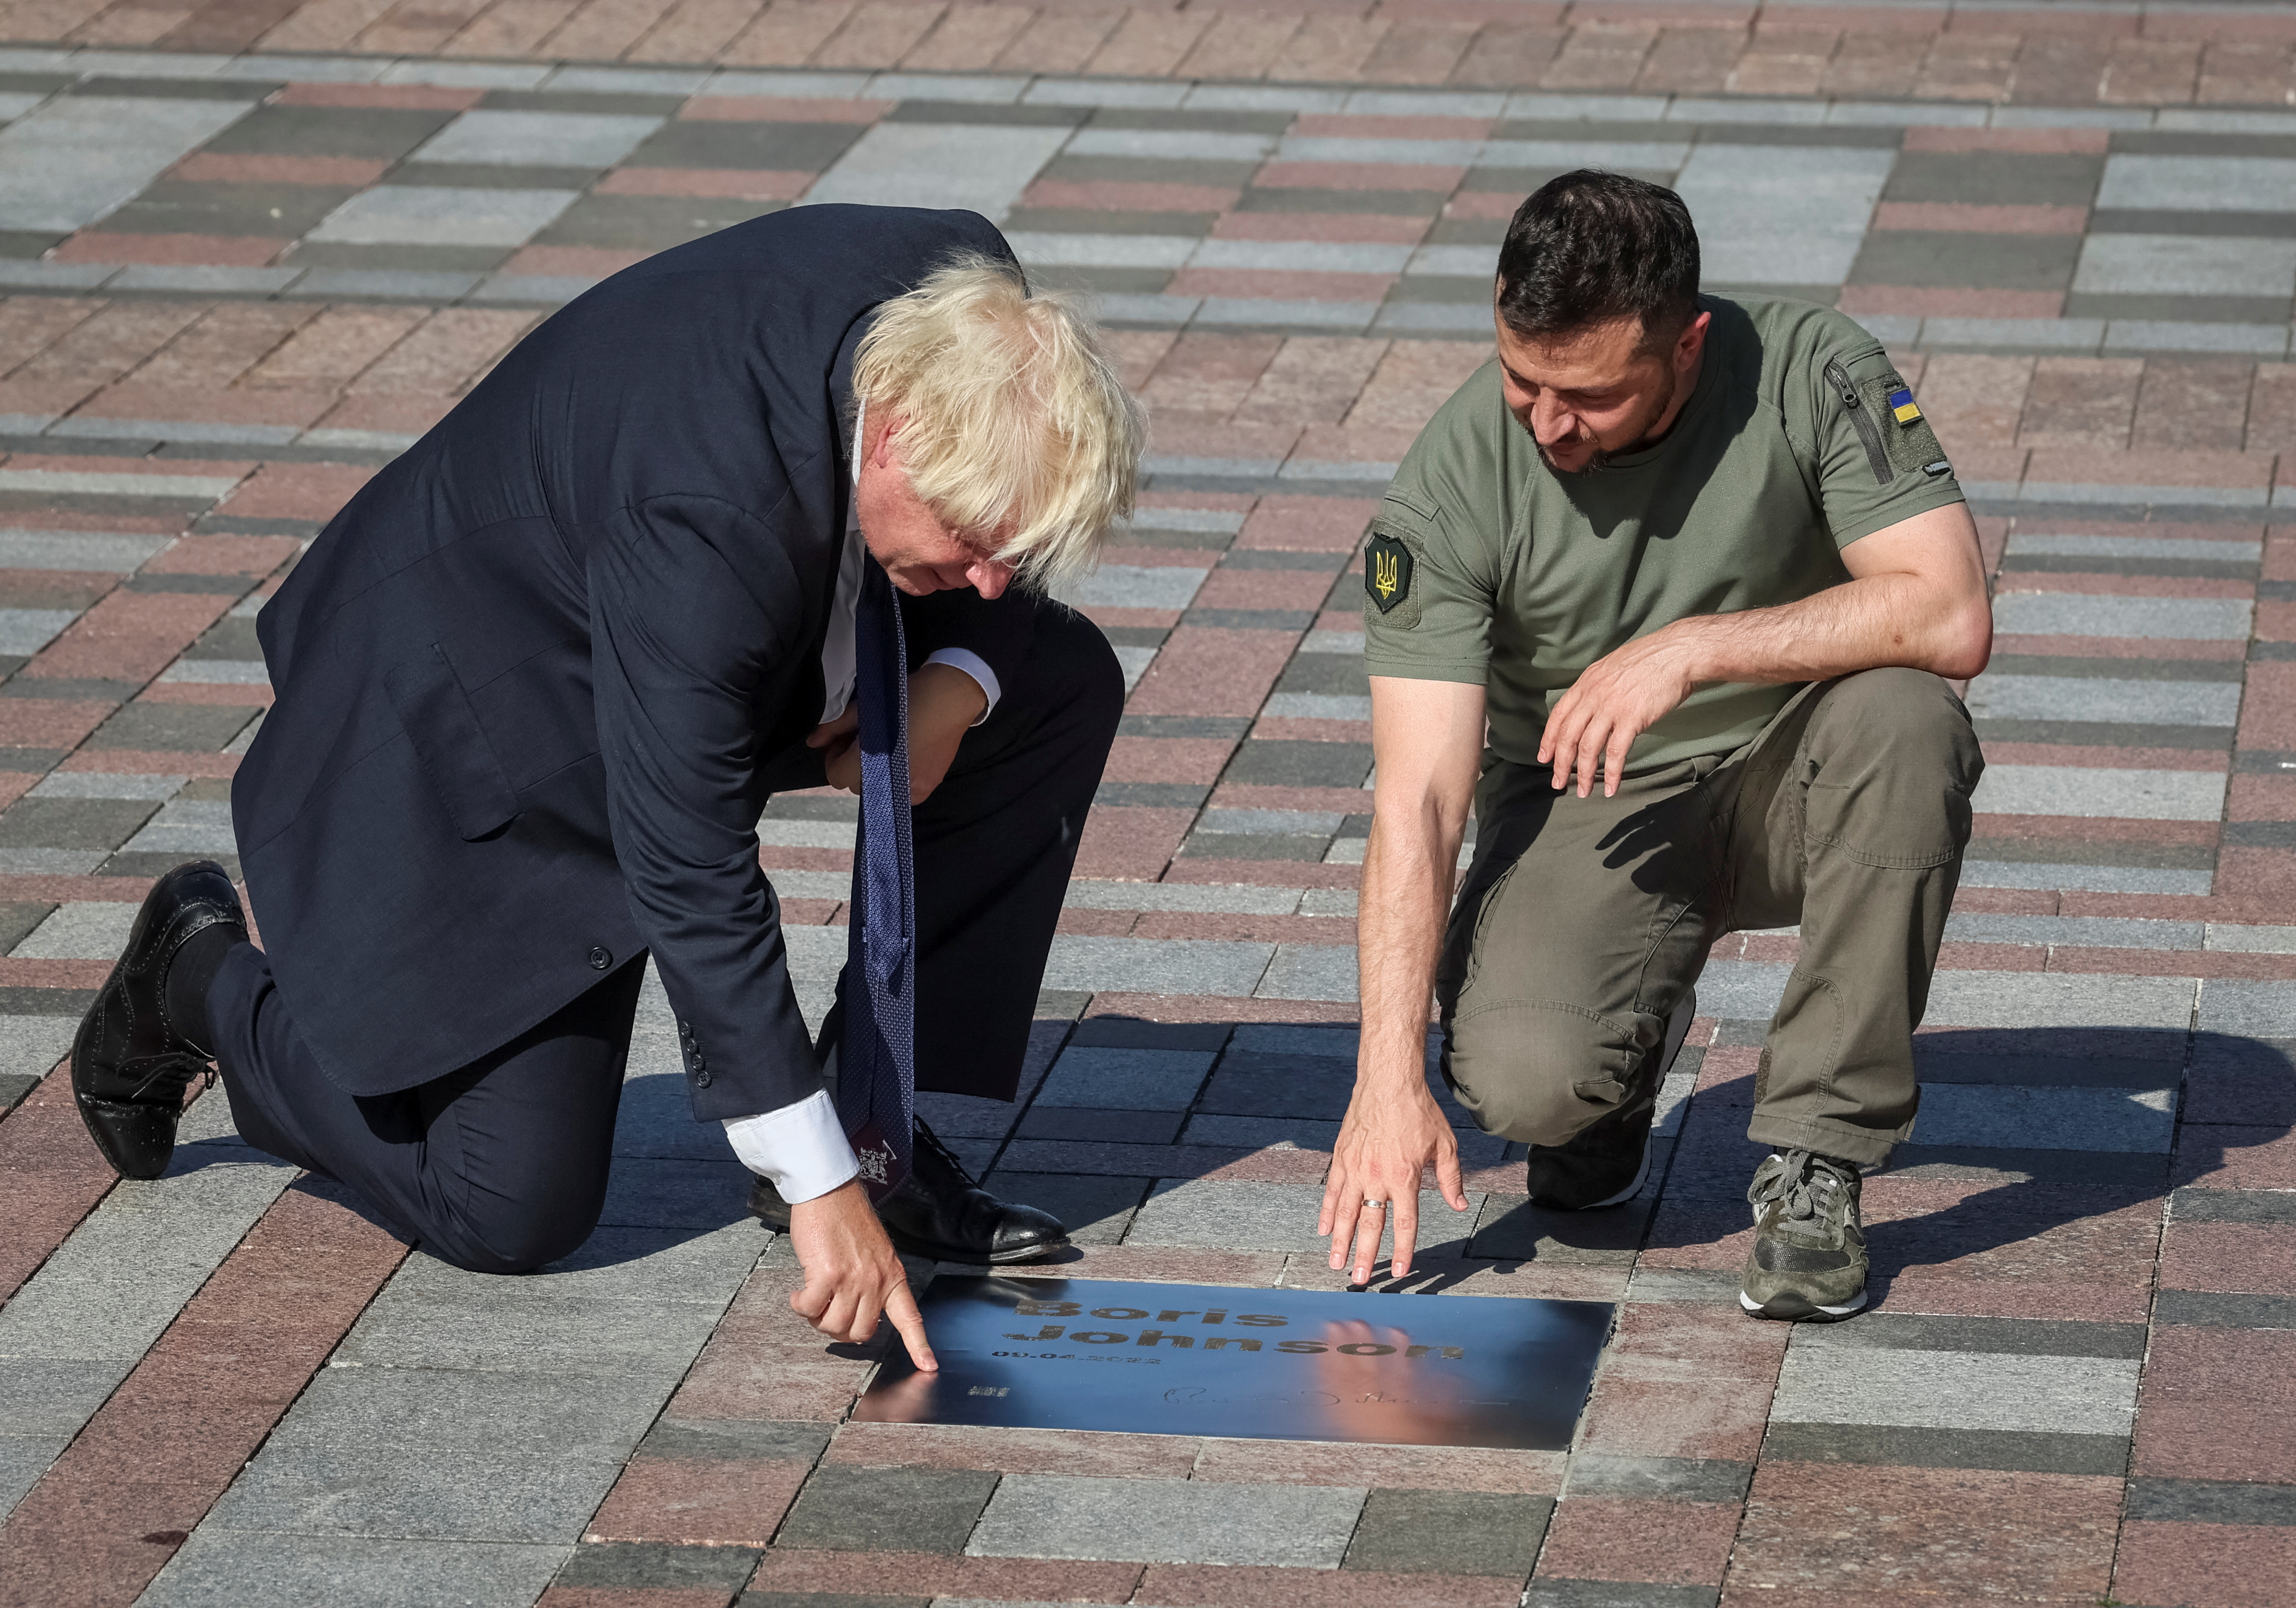 Ukraine's President Zelenskiy and British Prime Minister Johnson open a plate with his name on the Alley of Bravery in Kyiv